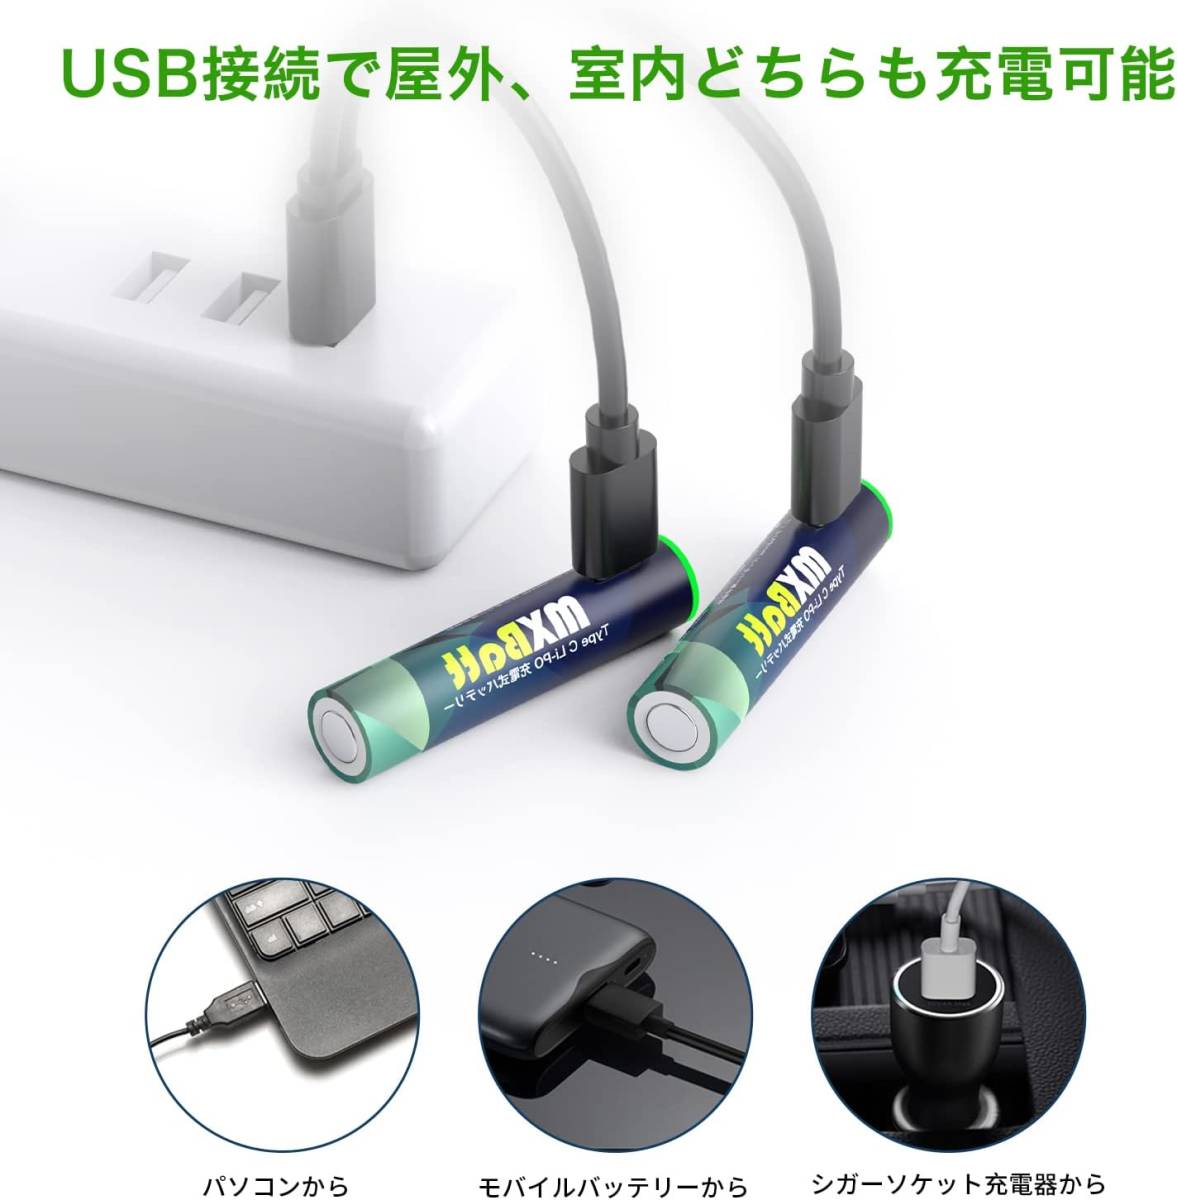  single 4 rechargeable battery 10ps.@MXBatt lithium ion rechargeable battery 1.5V rechargeable battery single 4 shape rechargeable AAA lithium battery 1200mWh protection times 